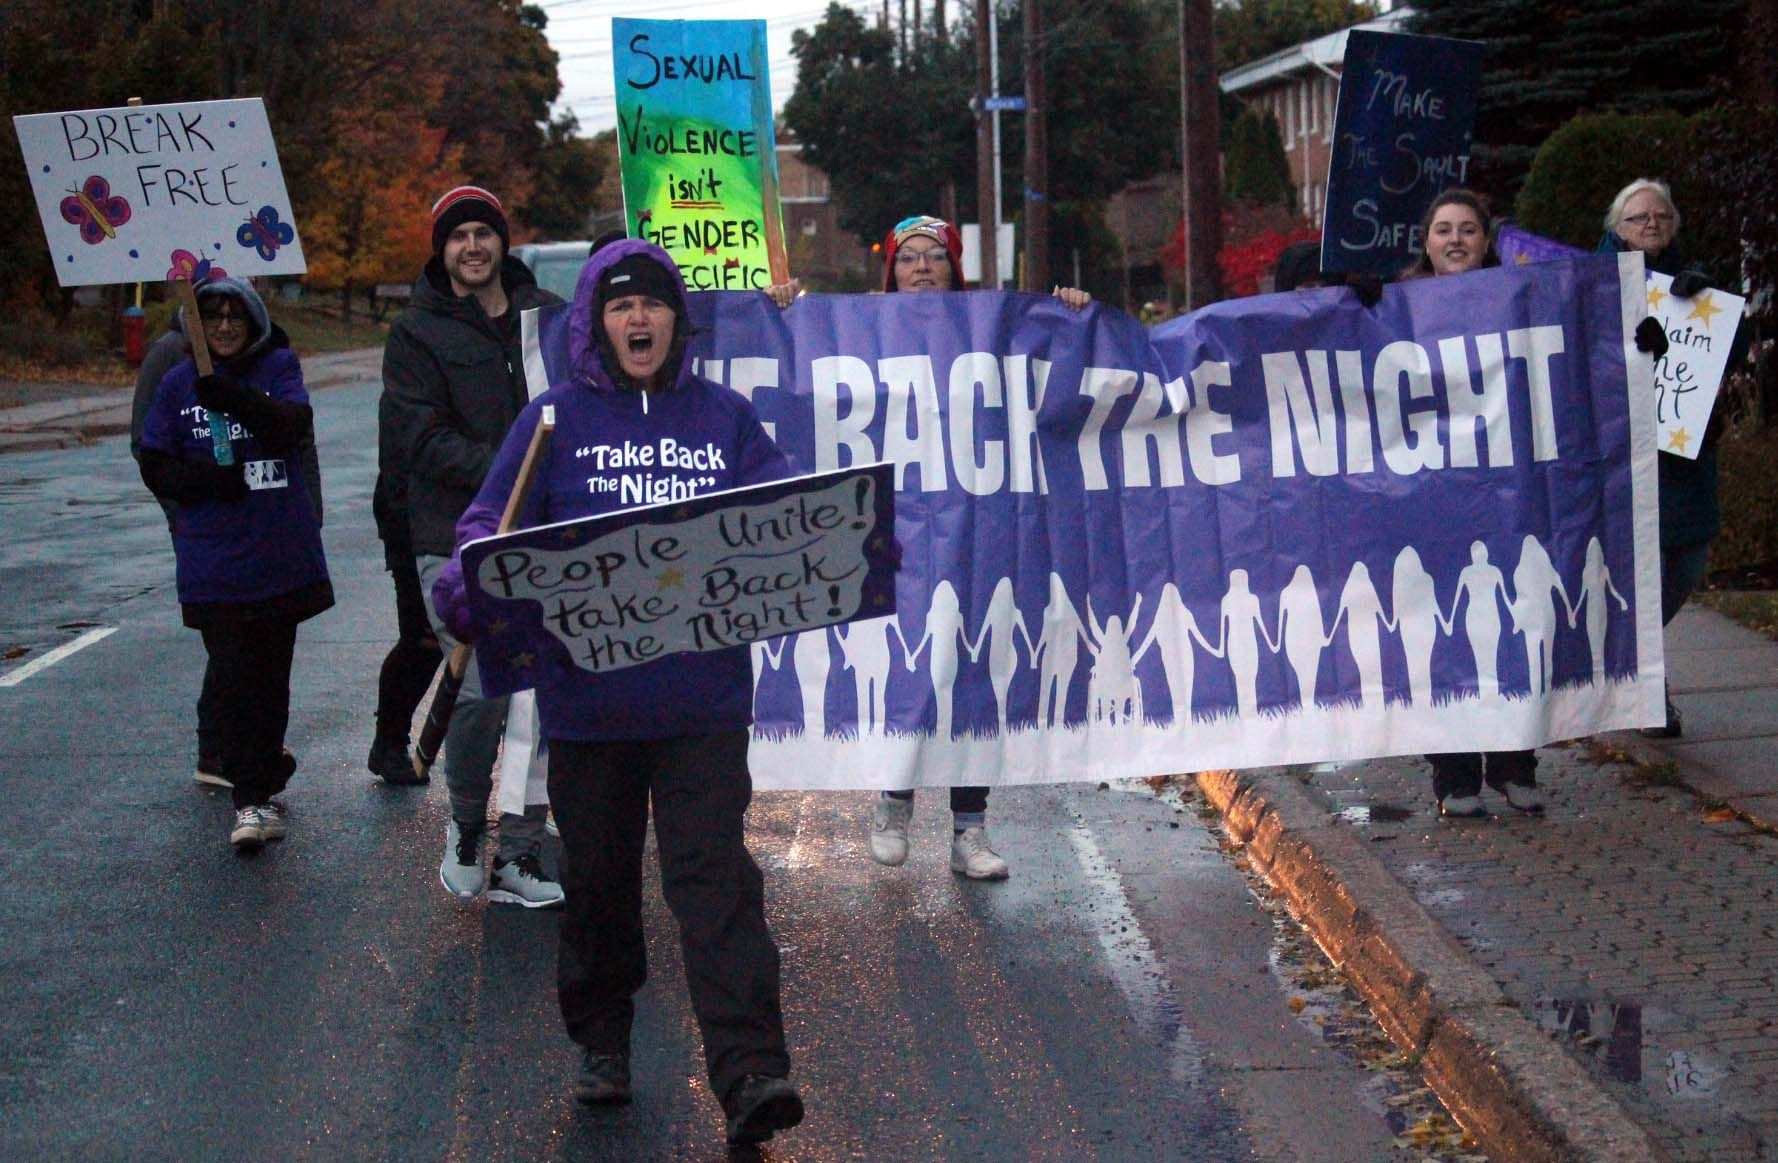 Take Back the Night back in Sault